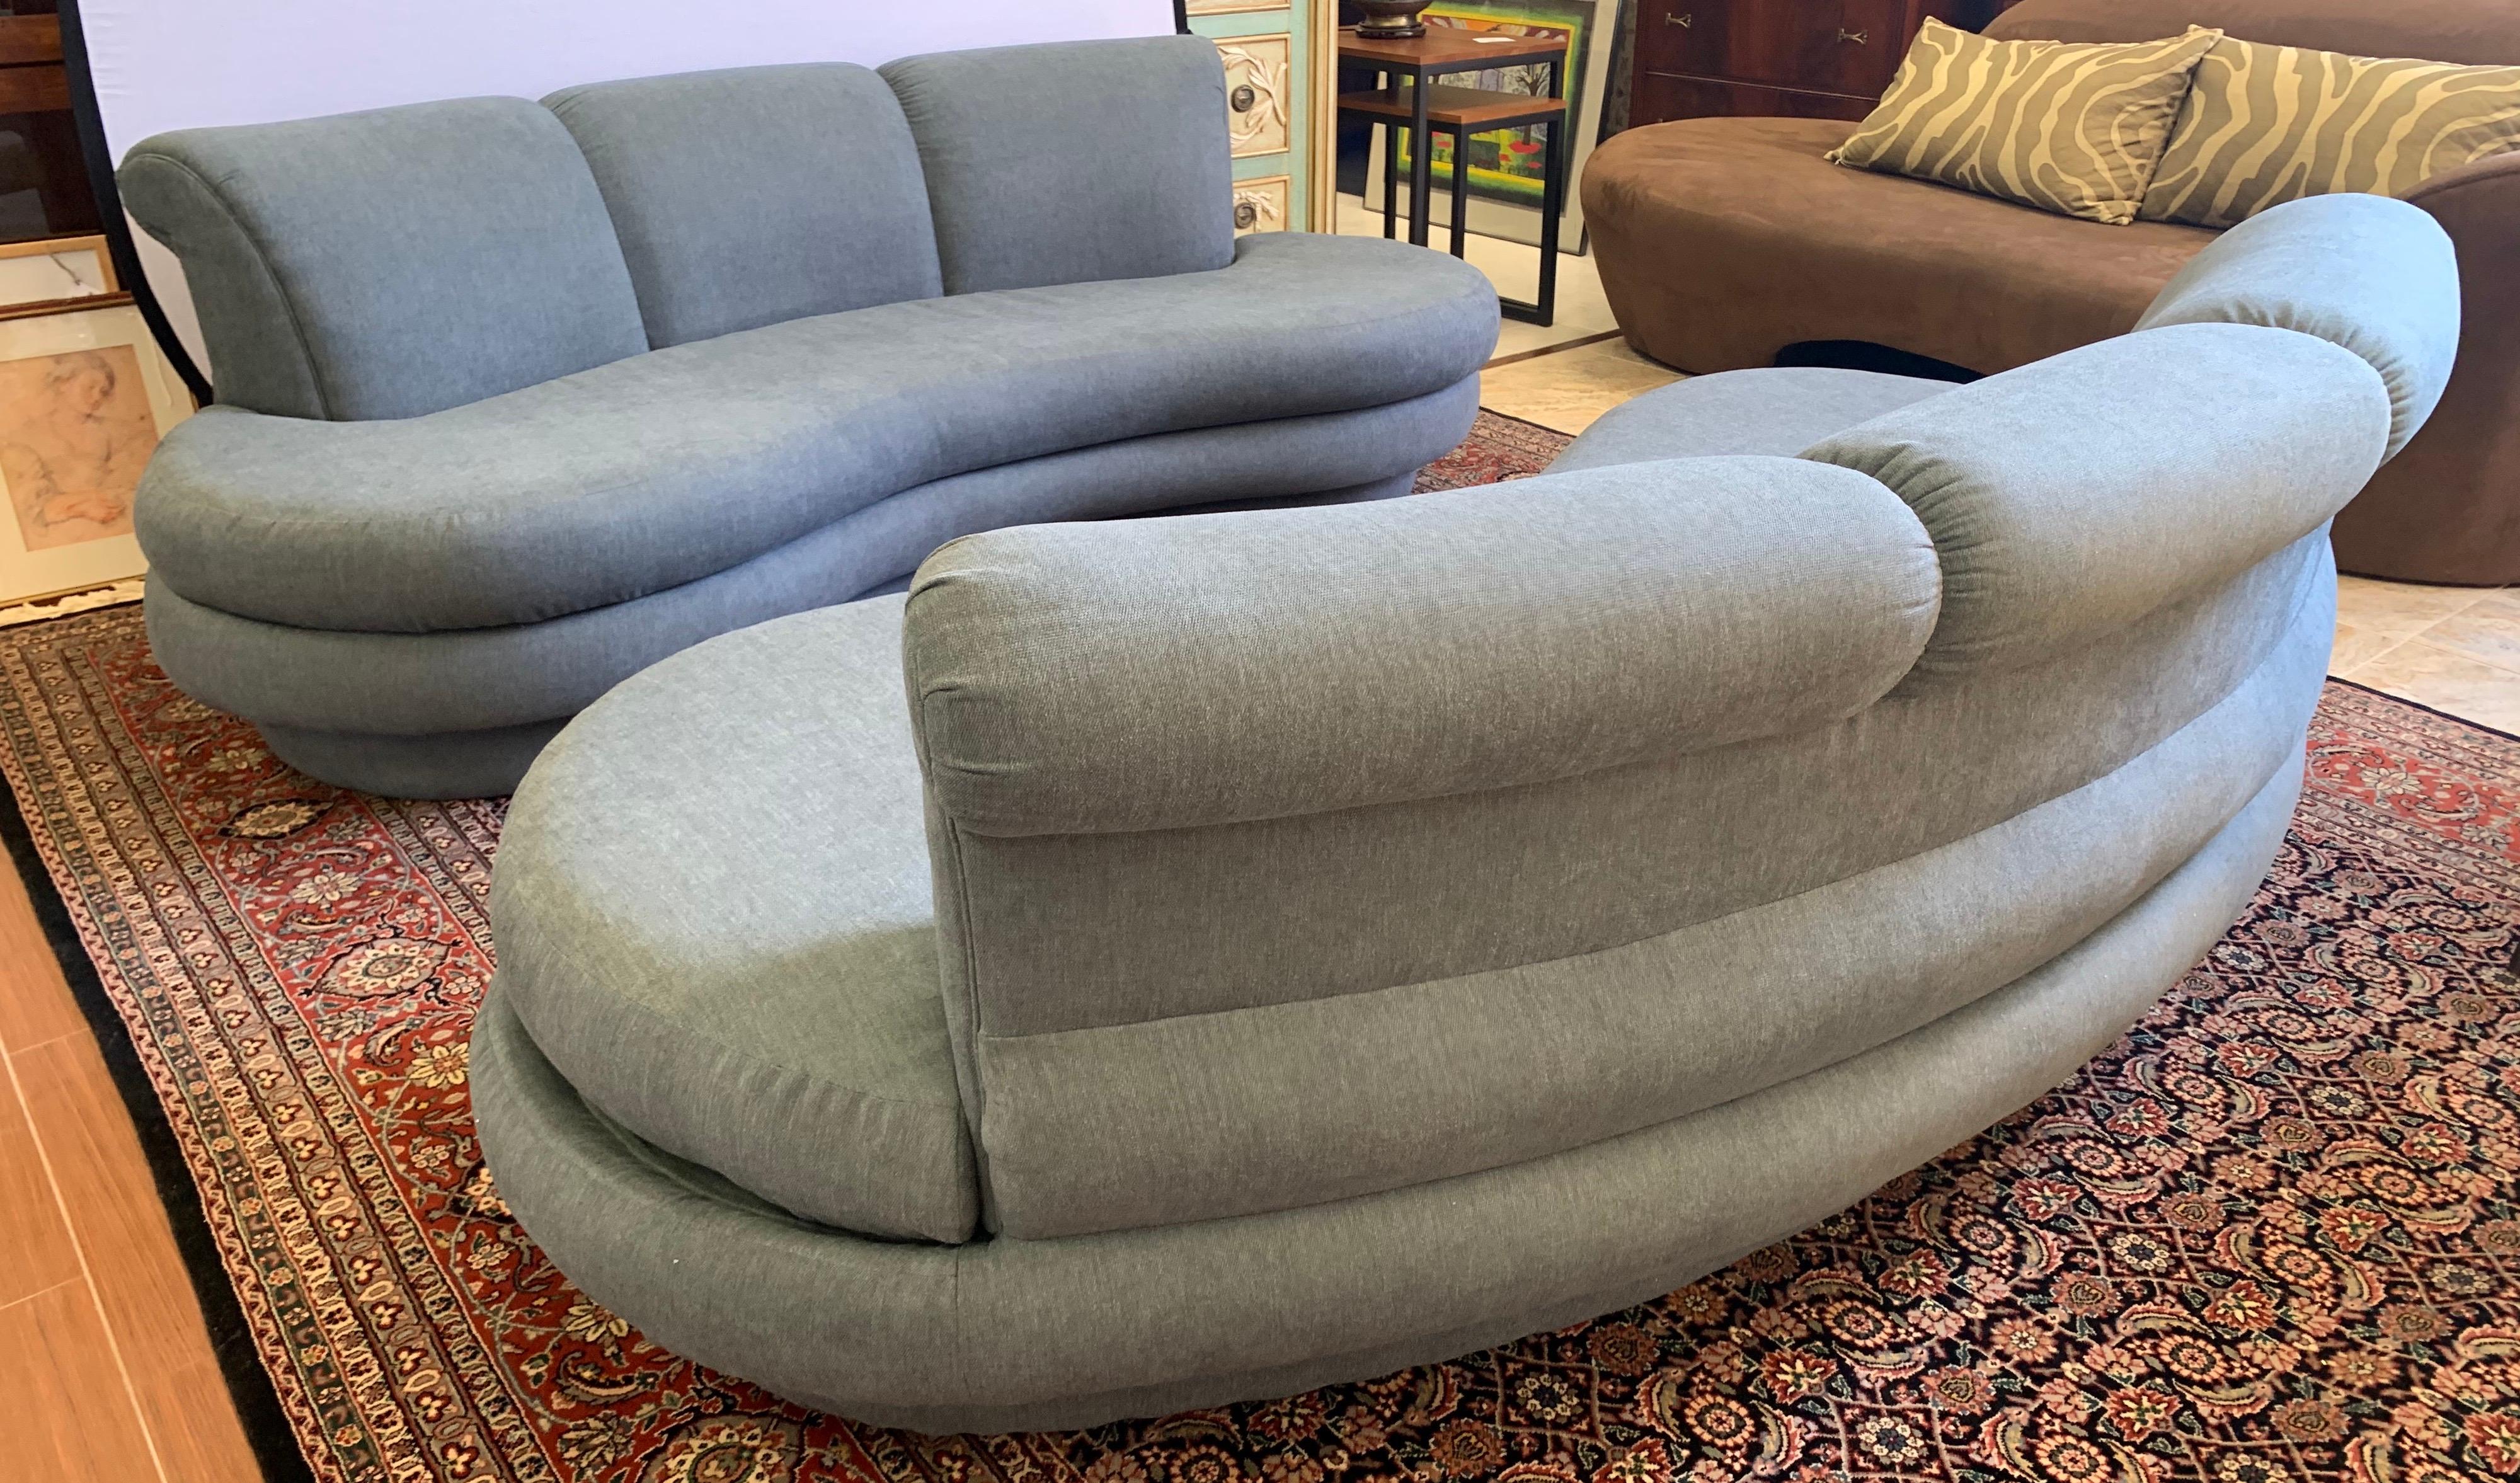 Matching Pearsall Comfort Design Cloud Sofas New Upholstered in Slate Gray, Pair 8